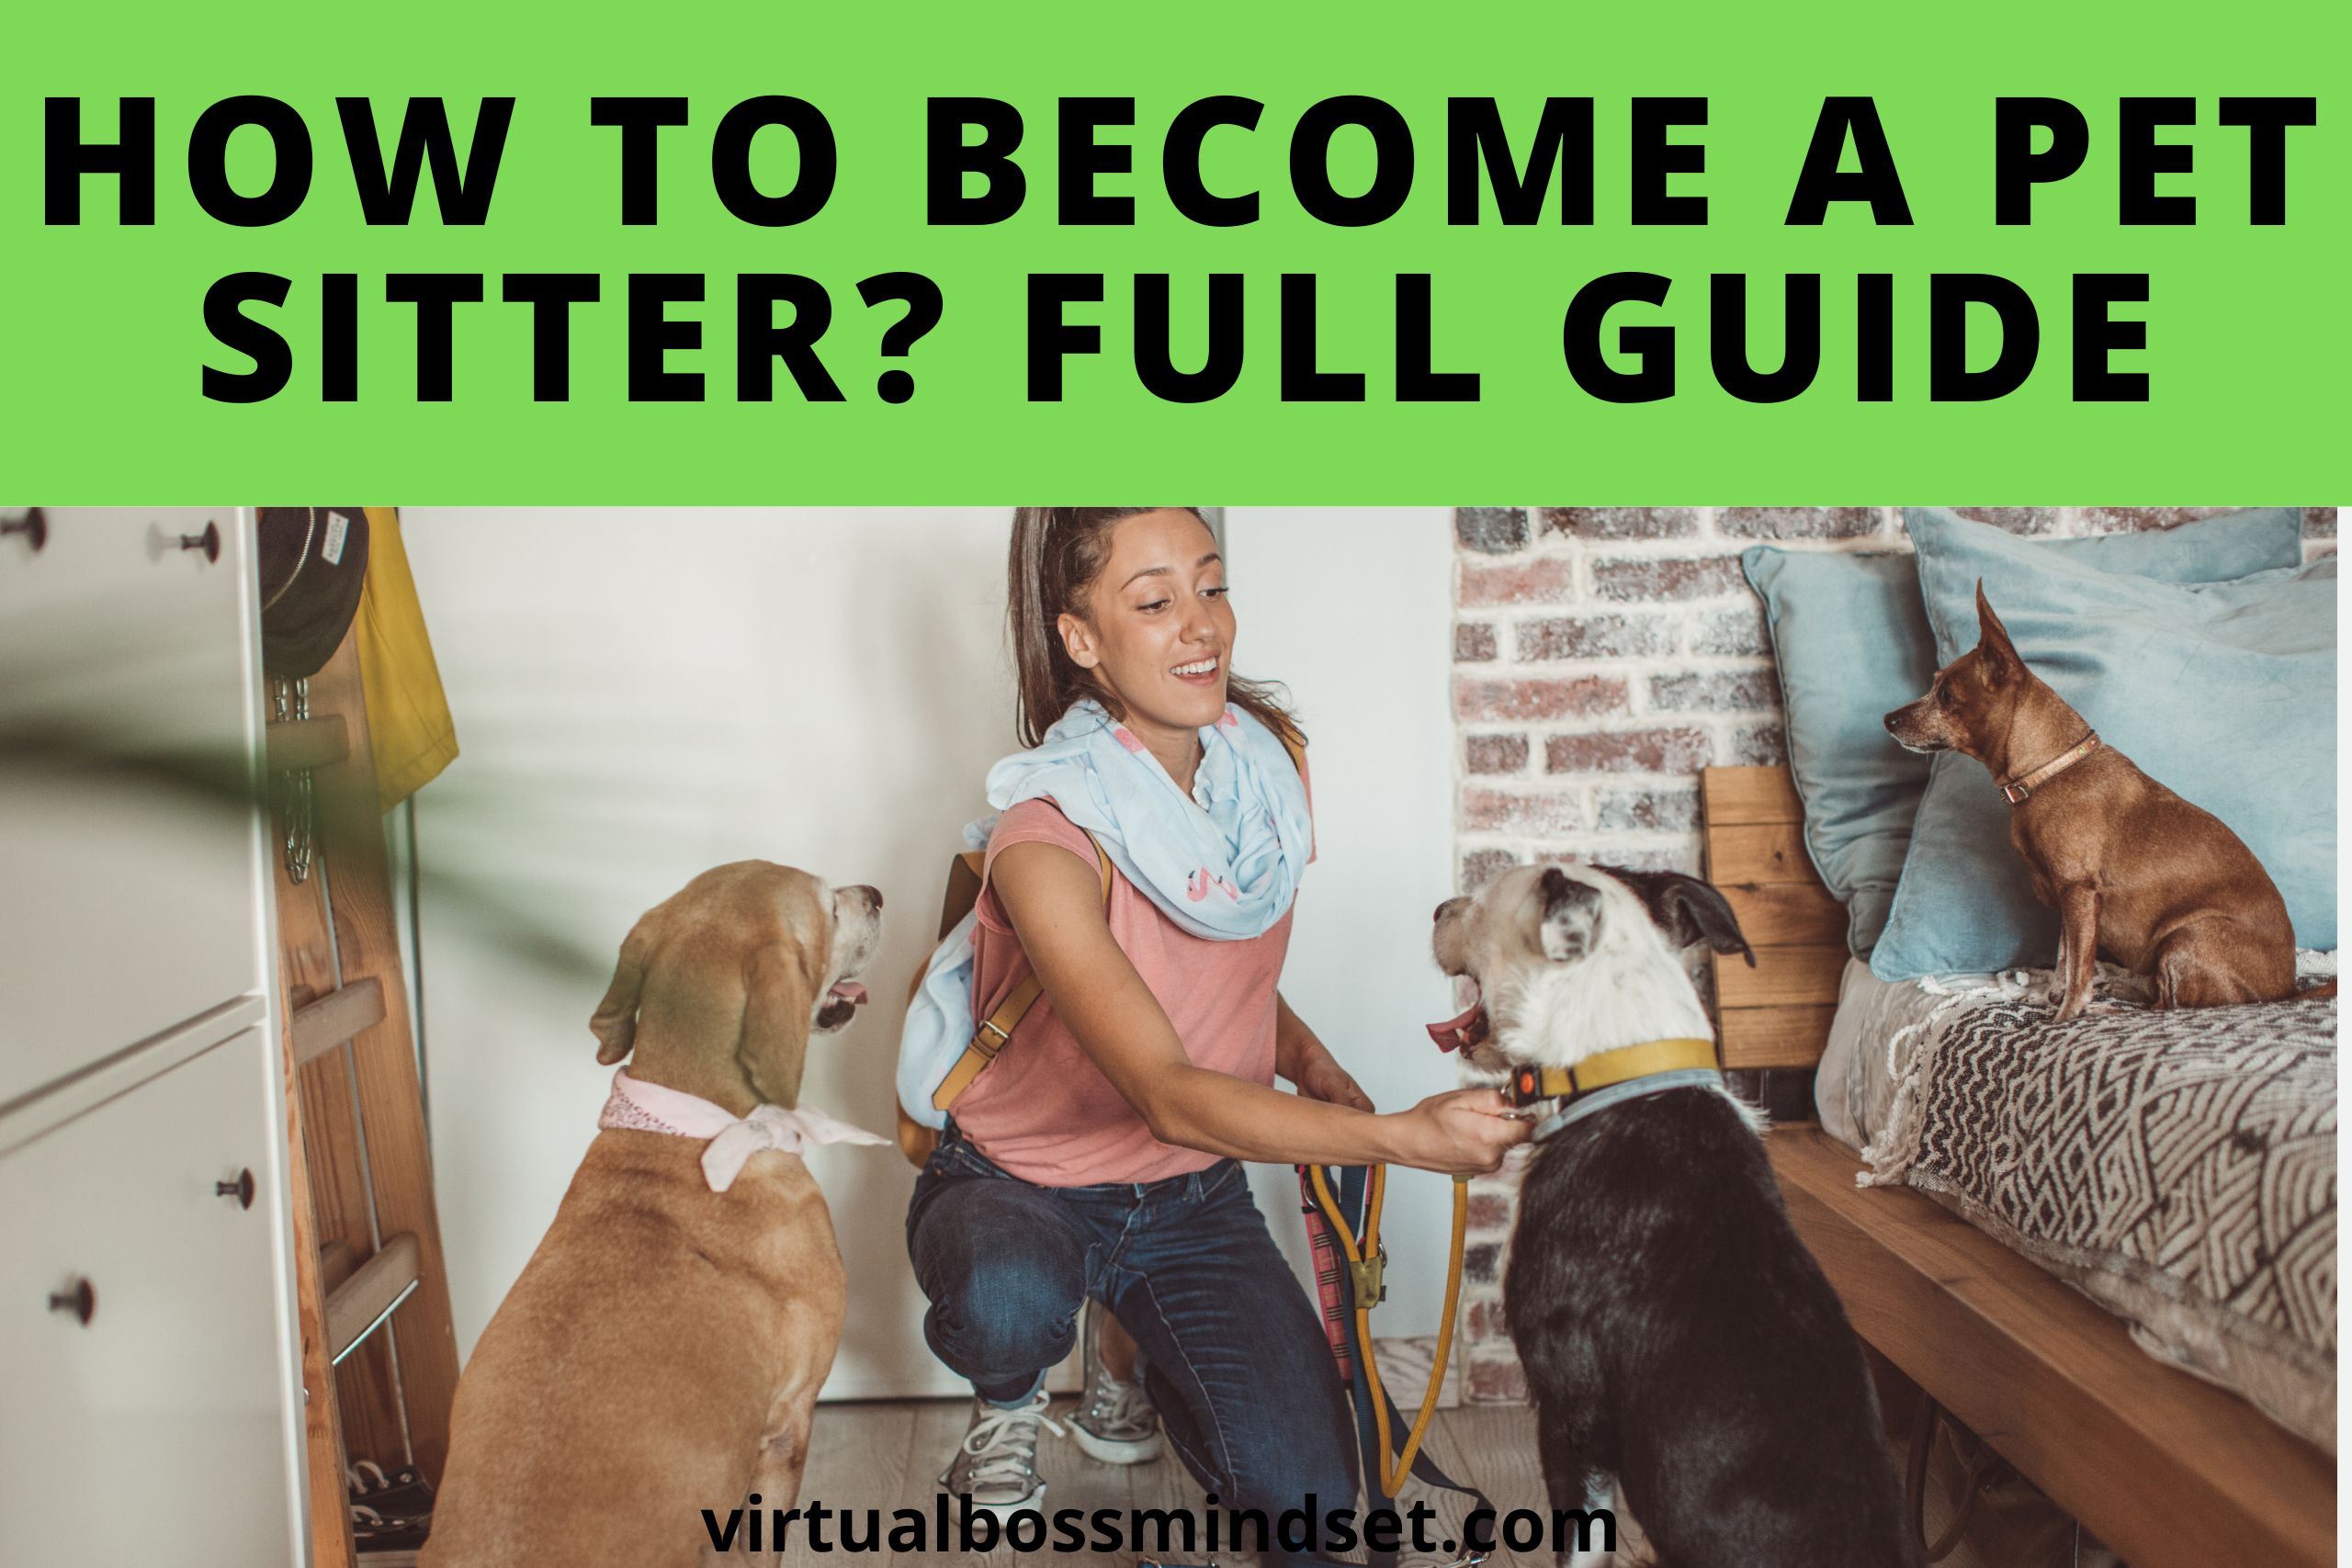 How to Be a Pet Sitter? All you need to know